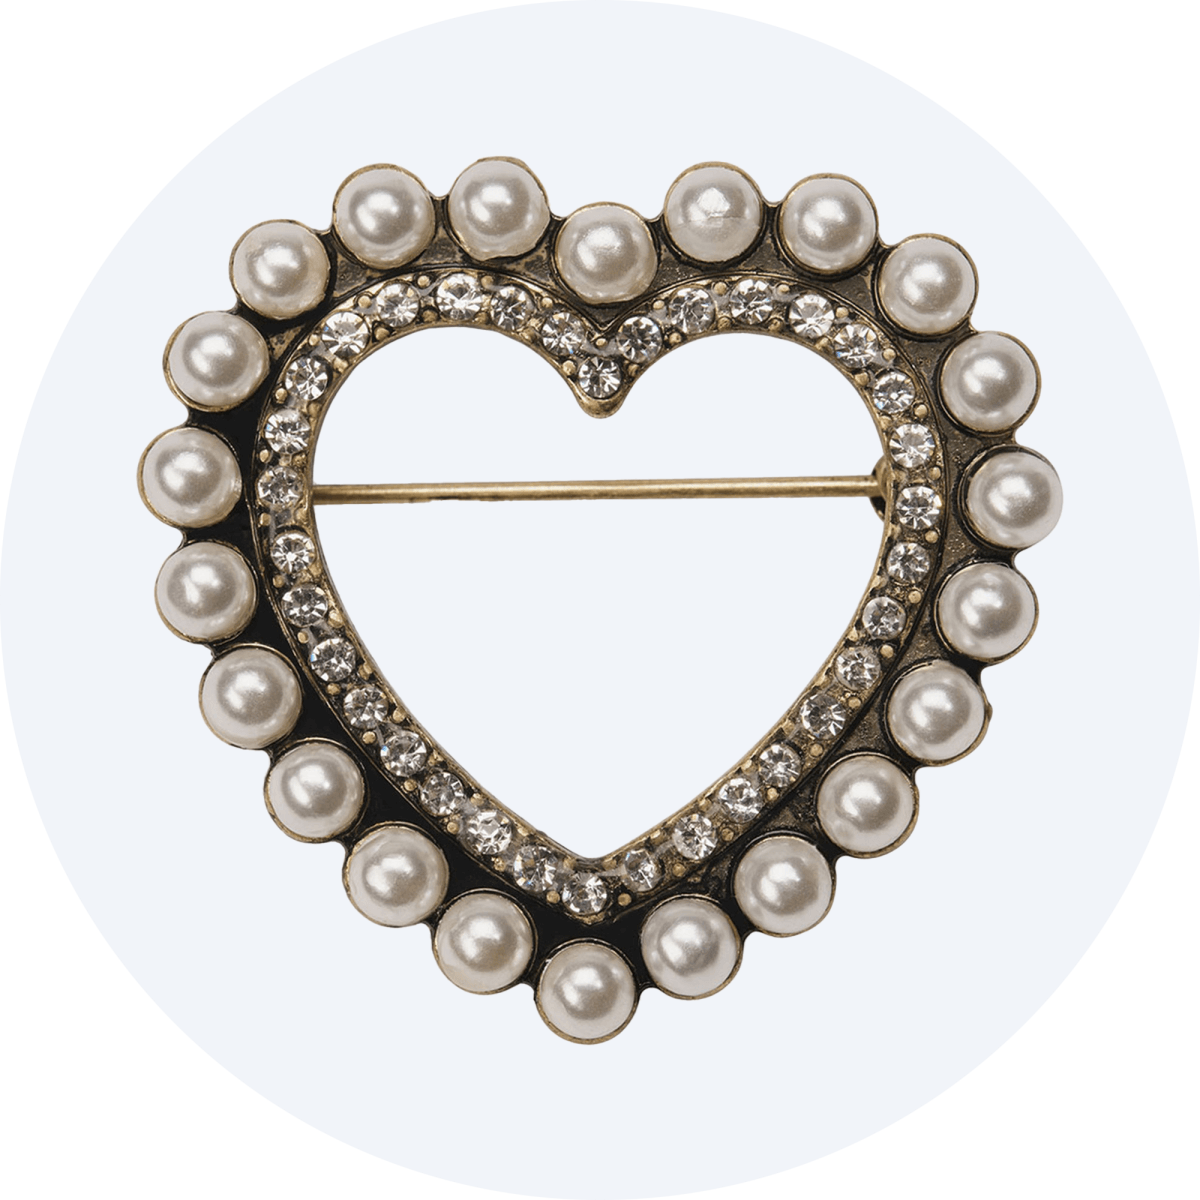 Vintage style heart brooch in pearl and diamante